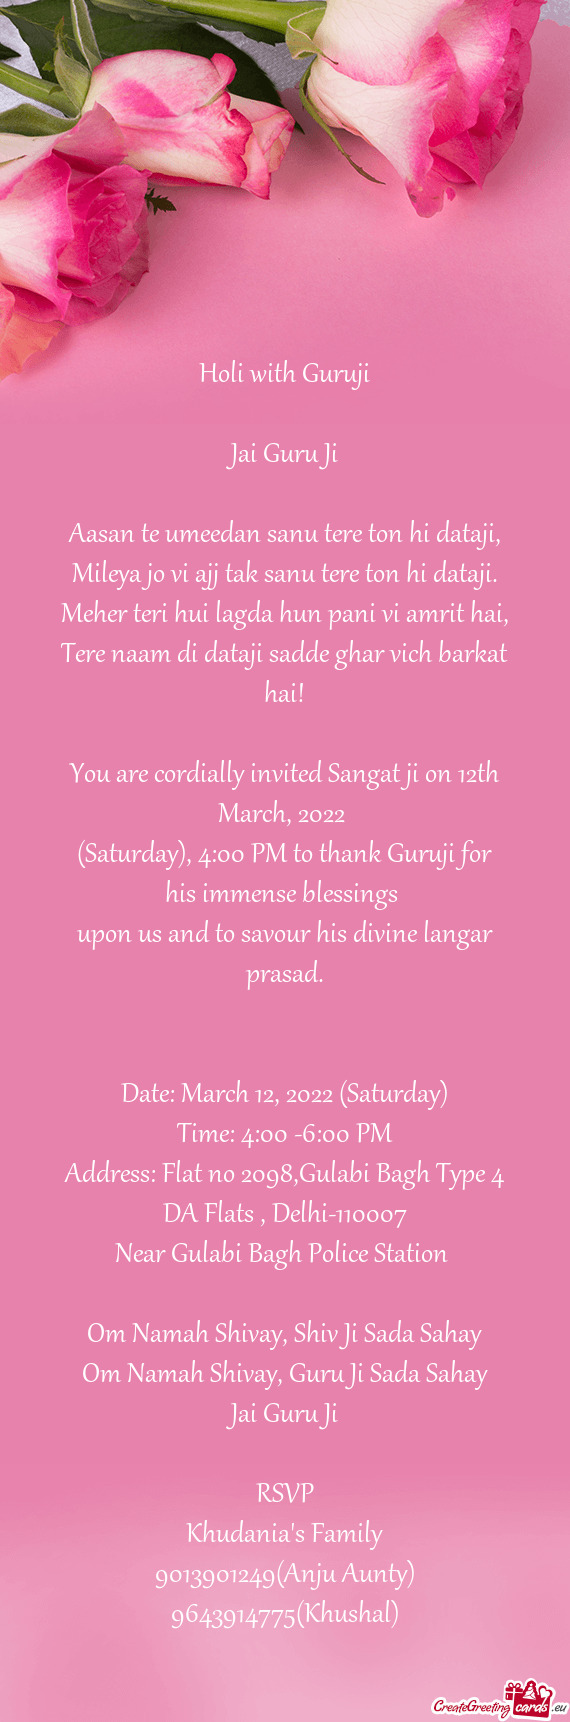 (Saturday), 4:00 PM to thank Guruji for his immense blessings